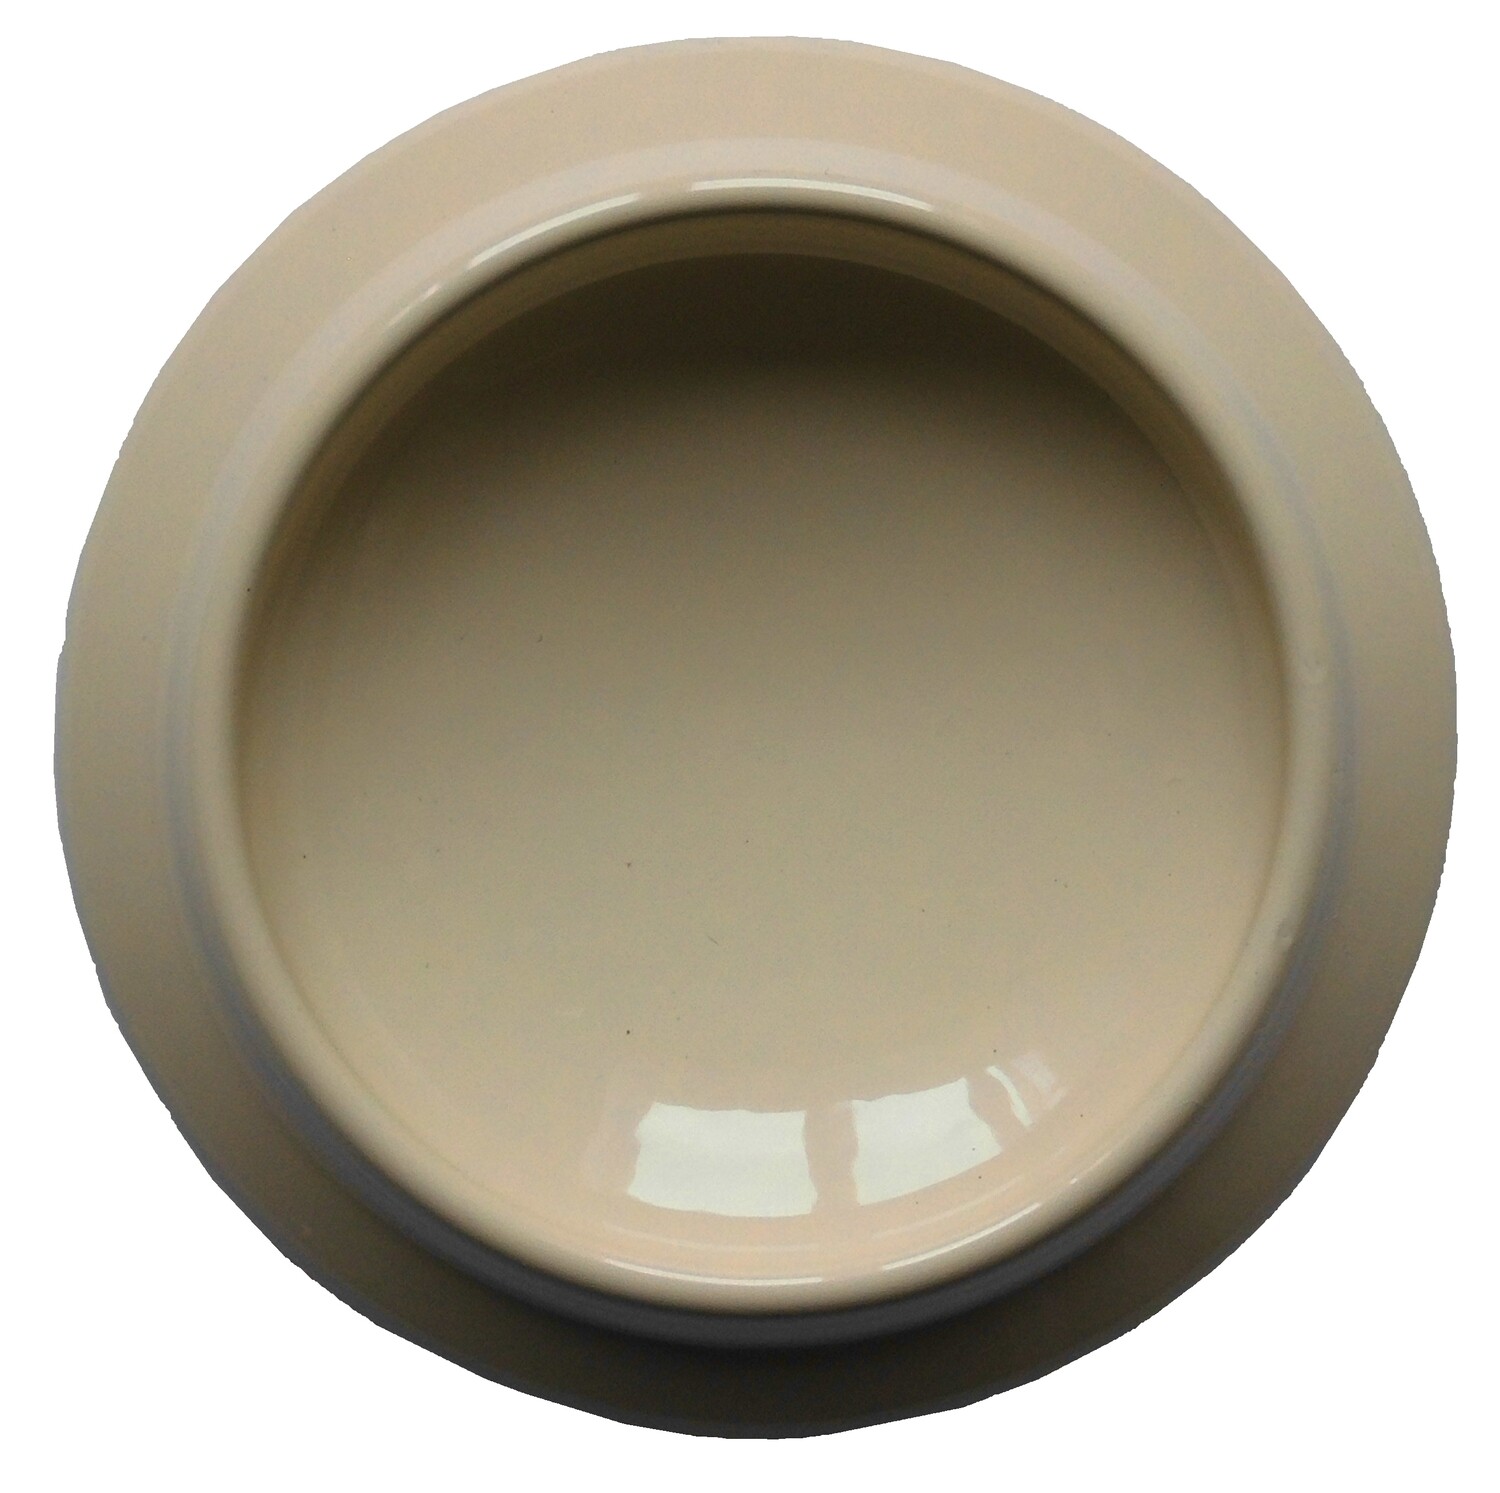 RAL 1015 Light IVORY, Weight: 250 g